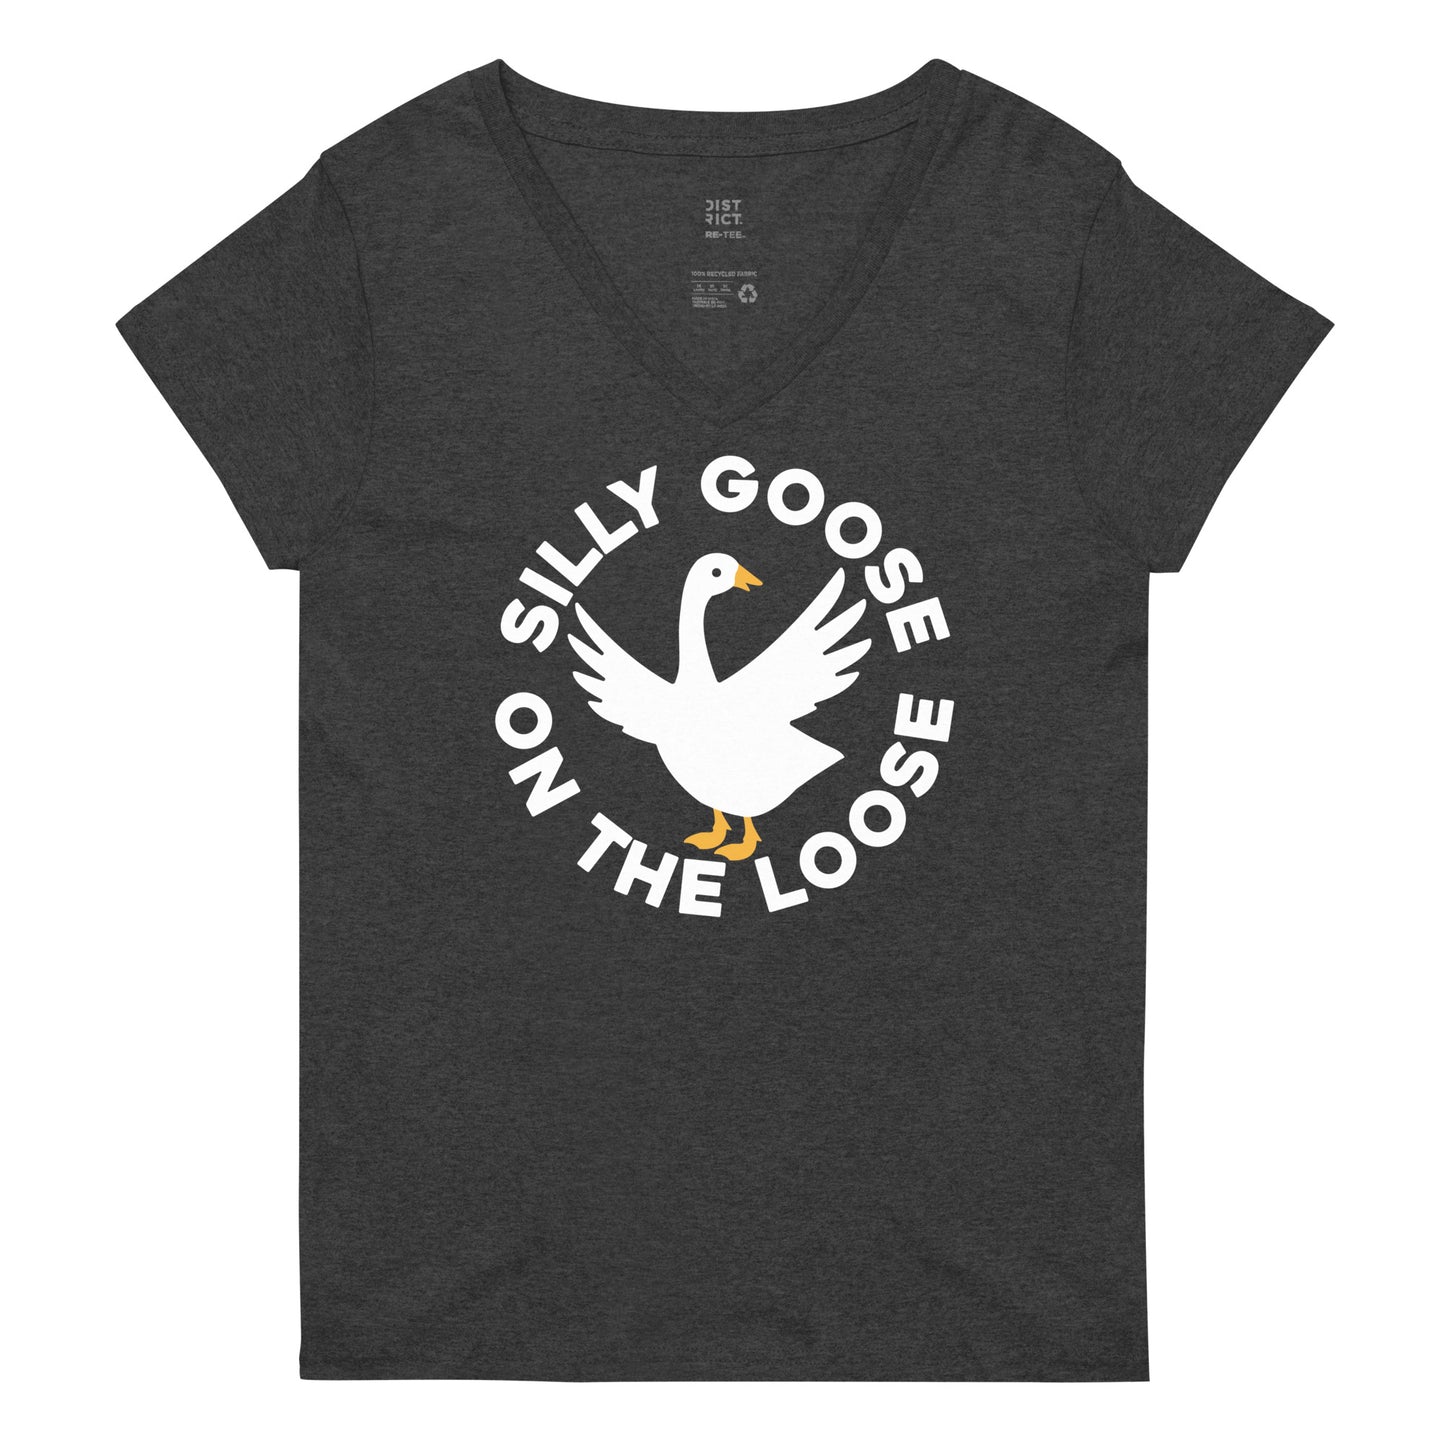 Silly Goose On The Loose Women's V-Neck Tee